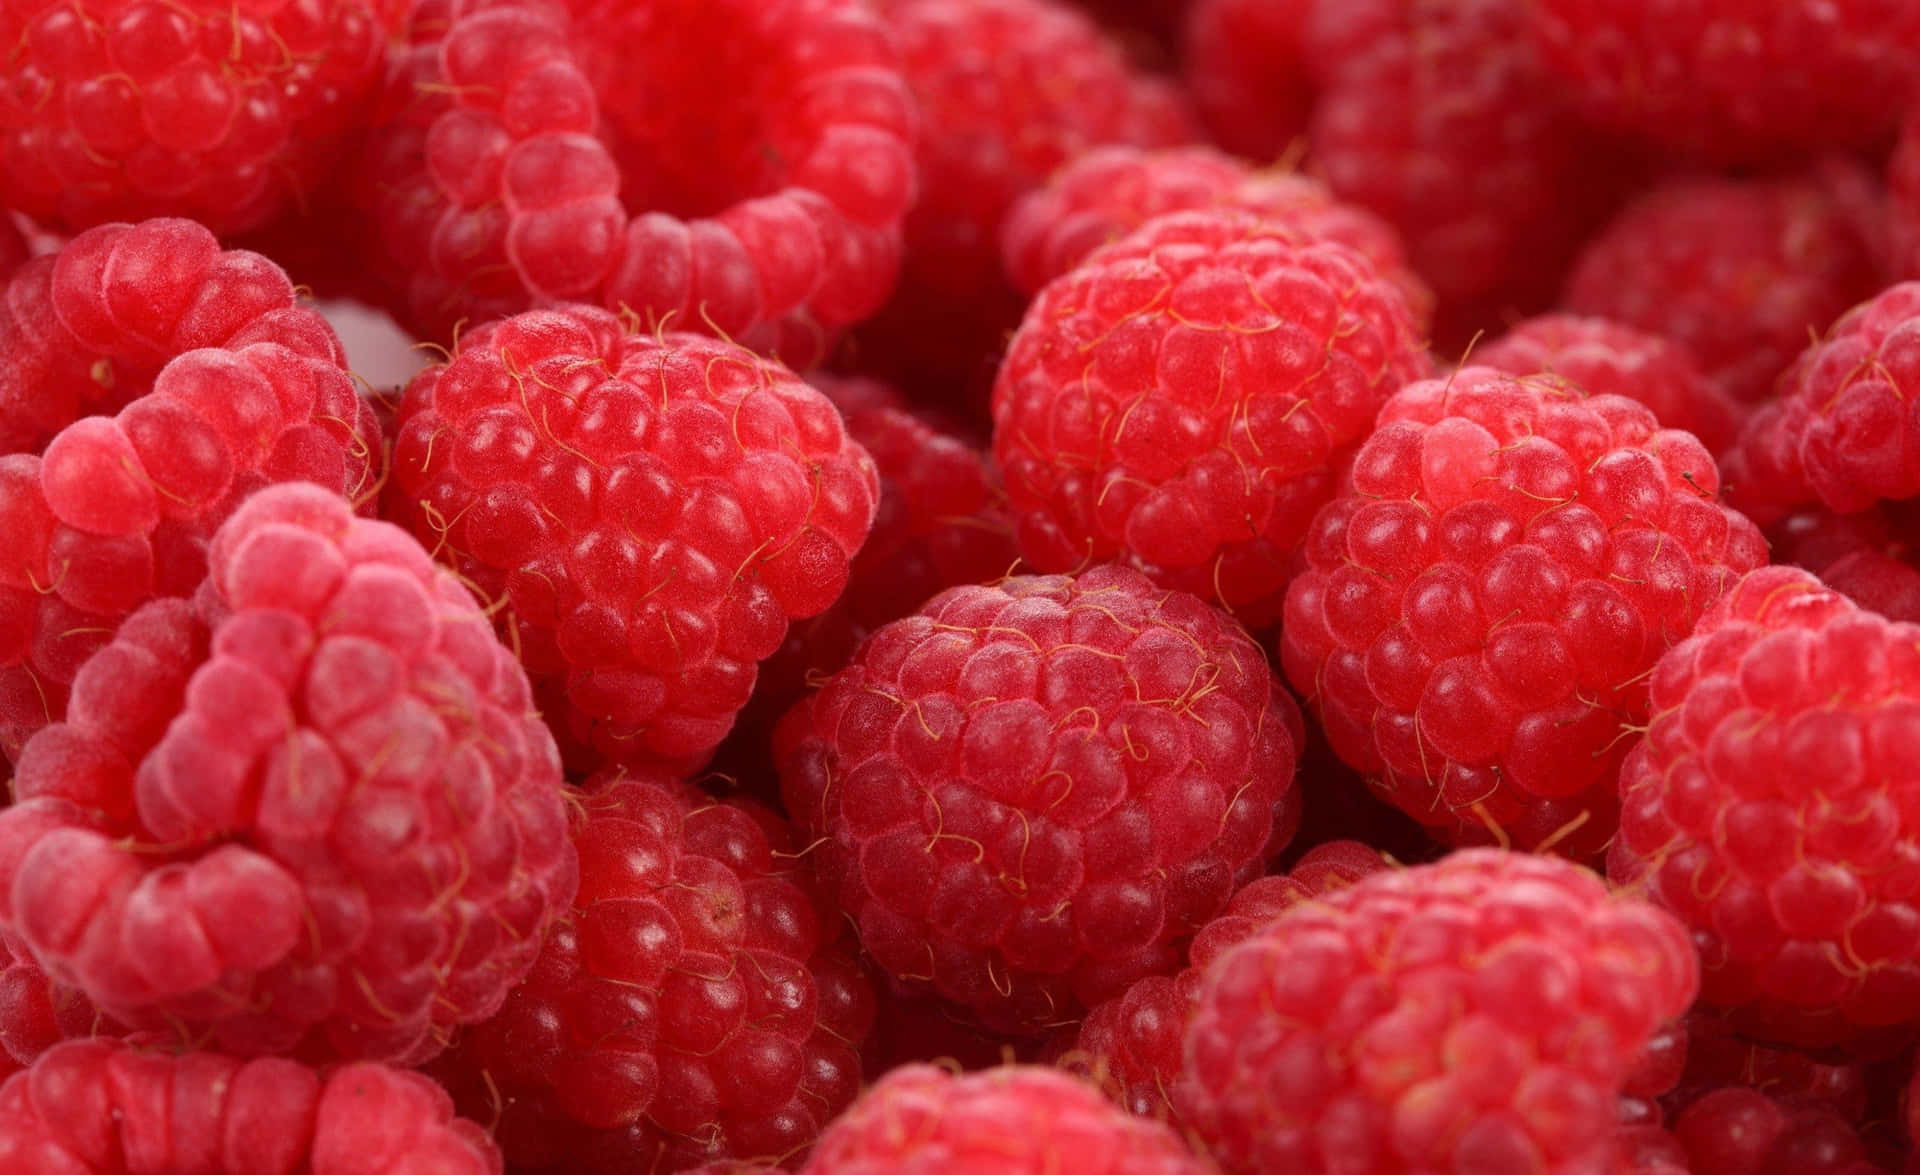 Raspberries Are Arranged In A Pile